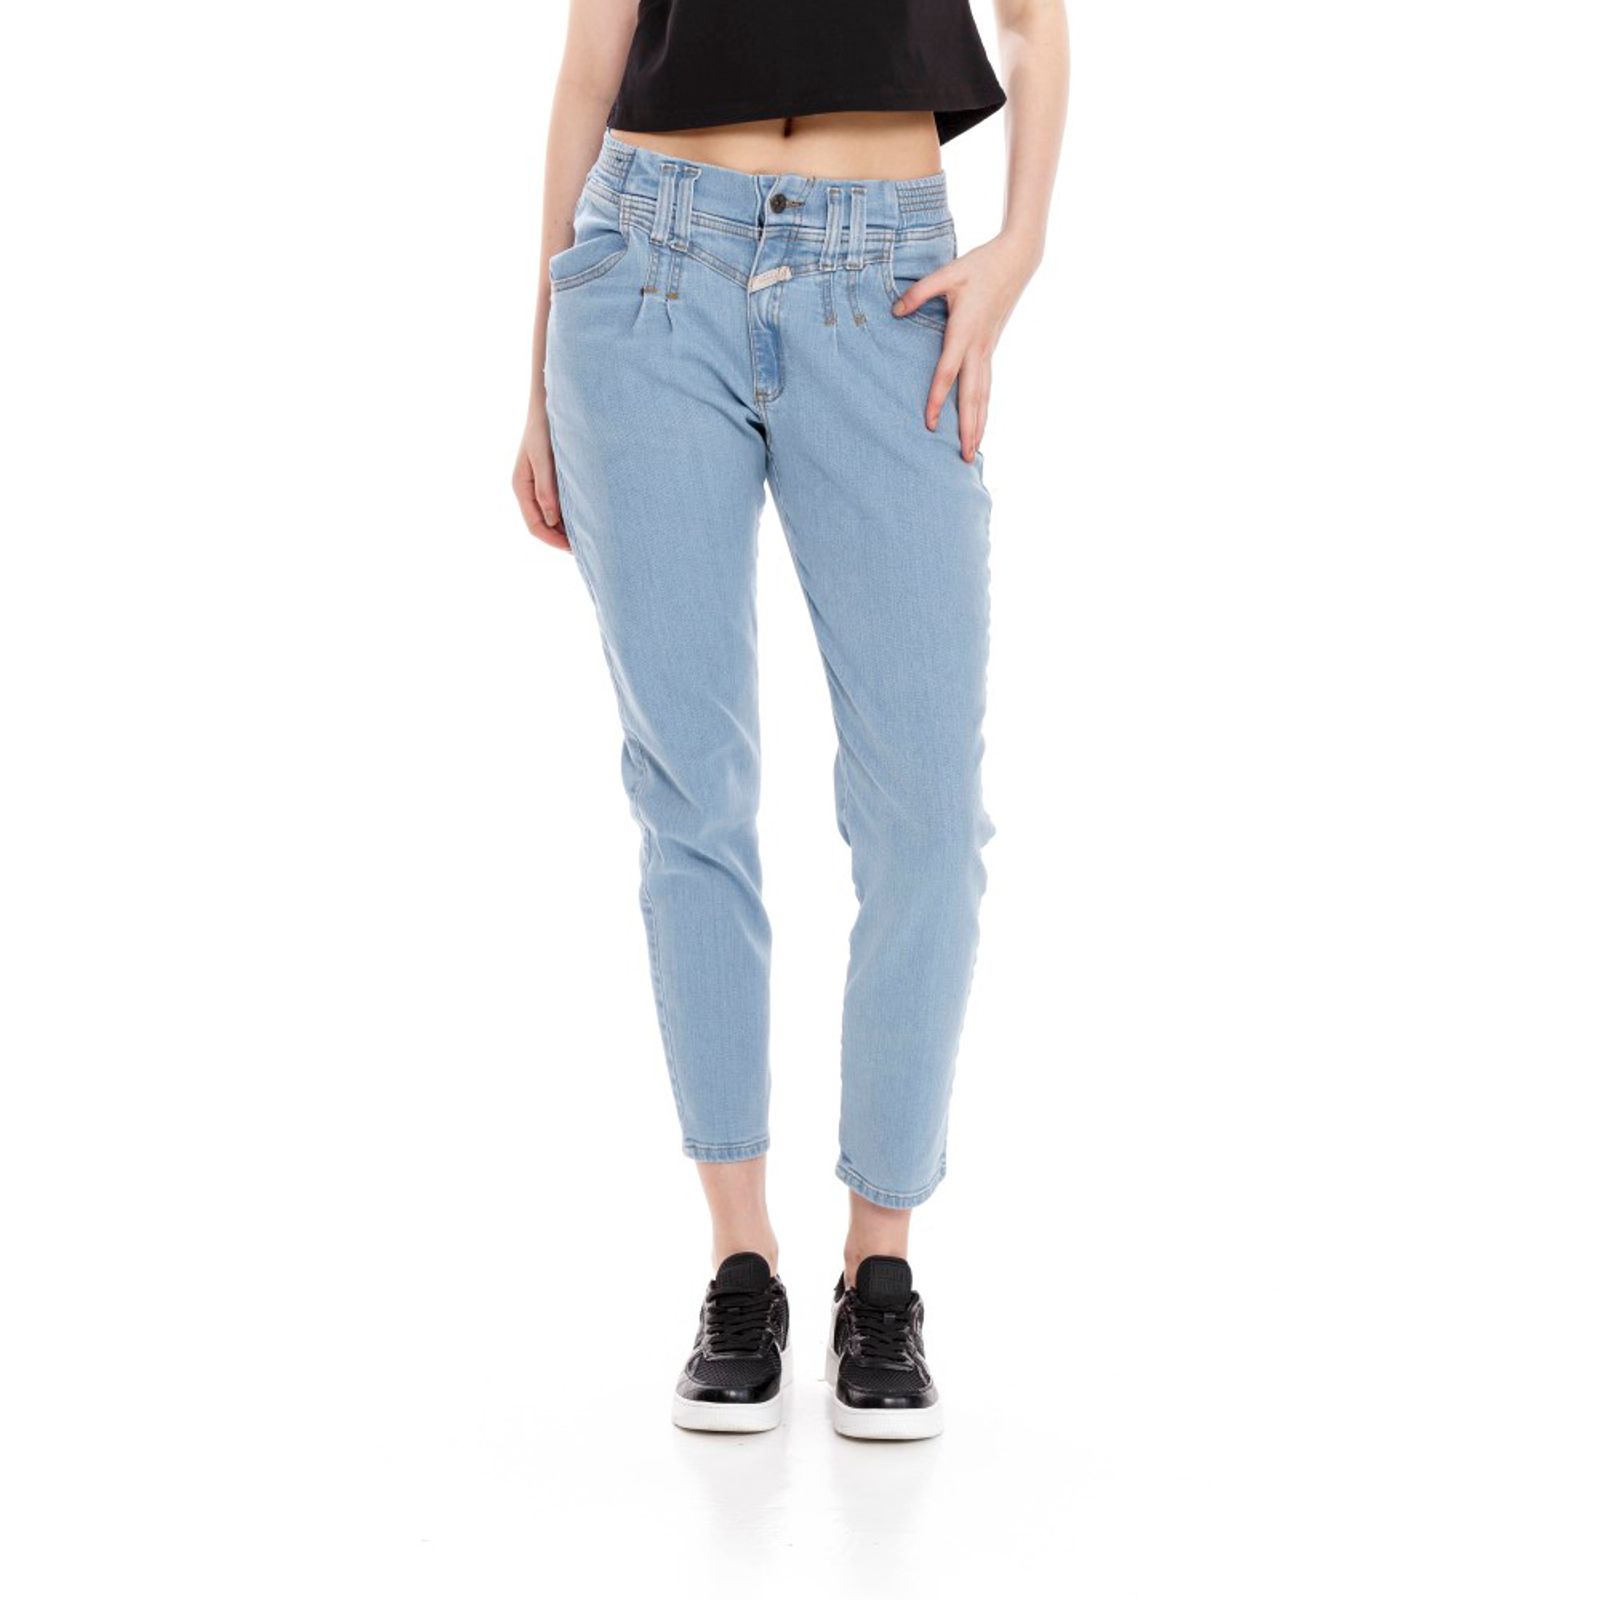 Jean Stretch Para Mujer Baggy